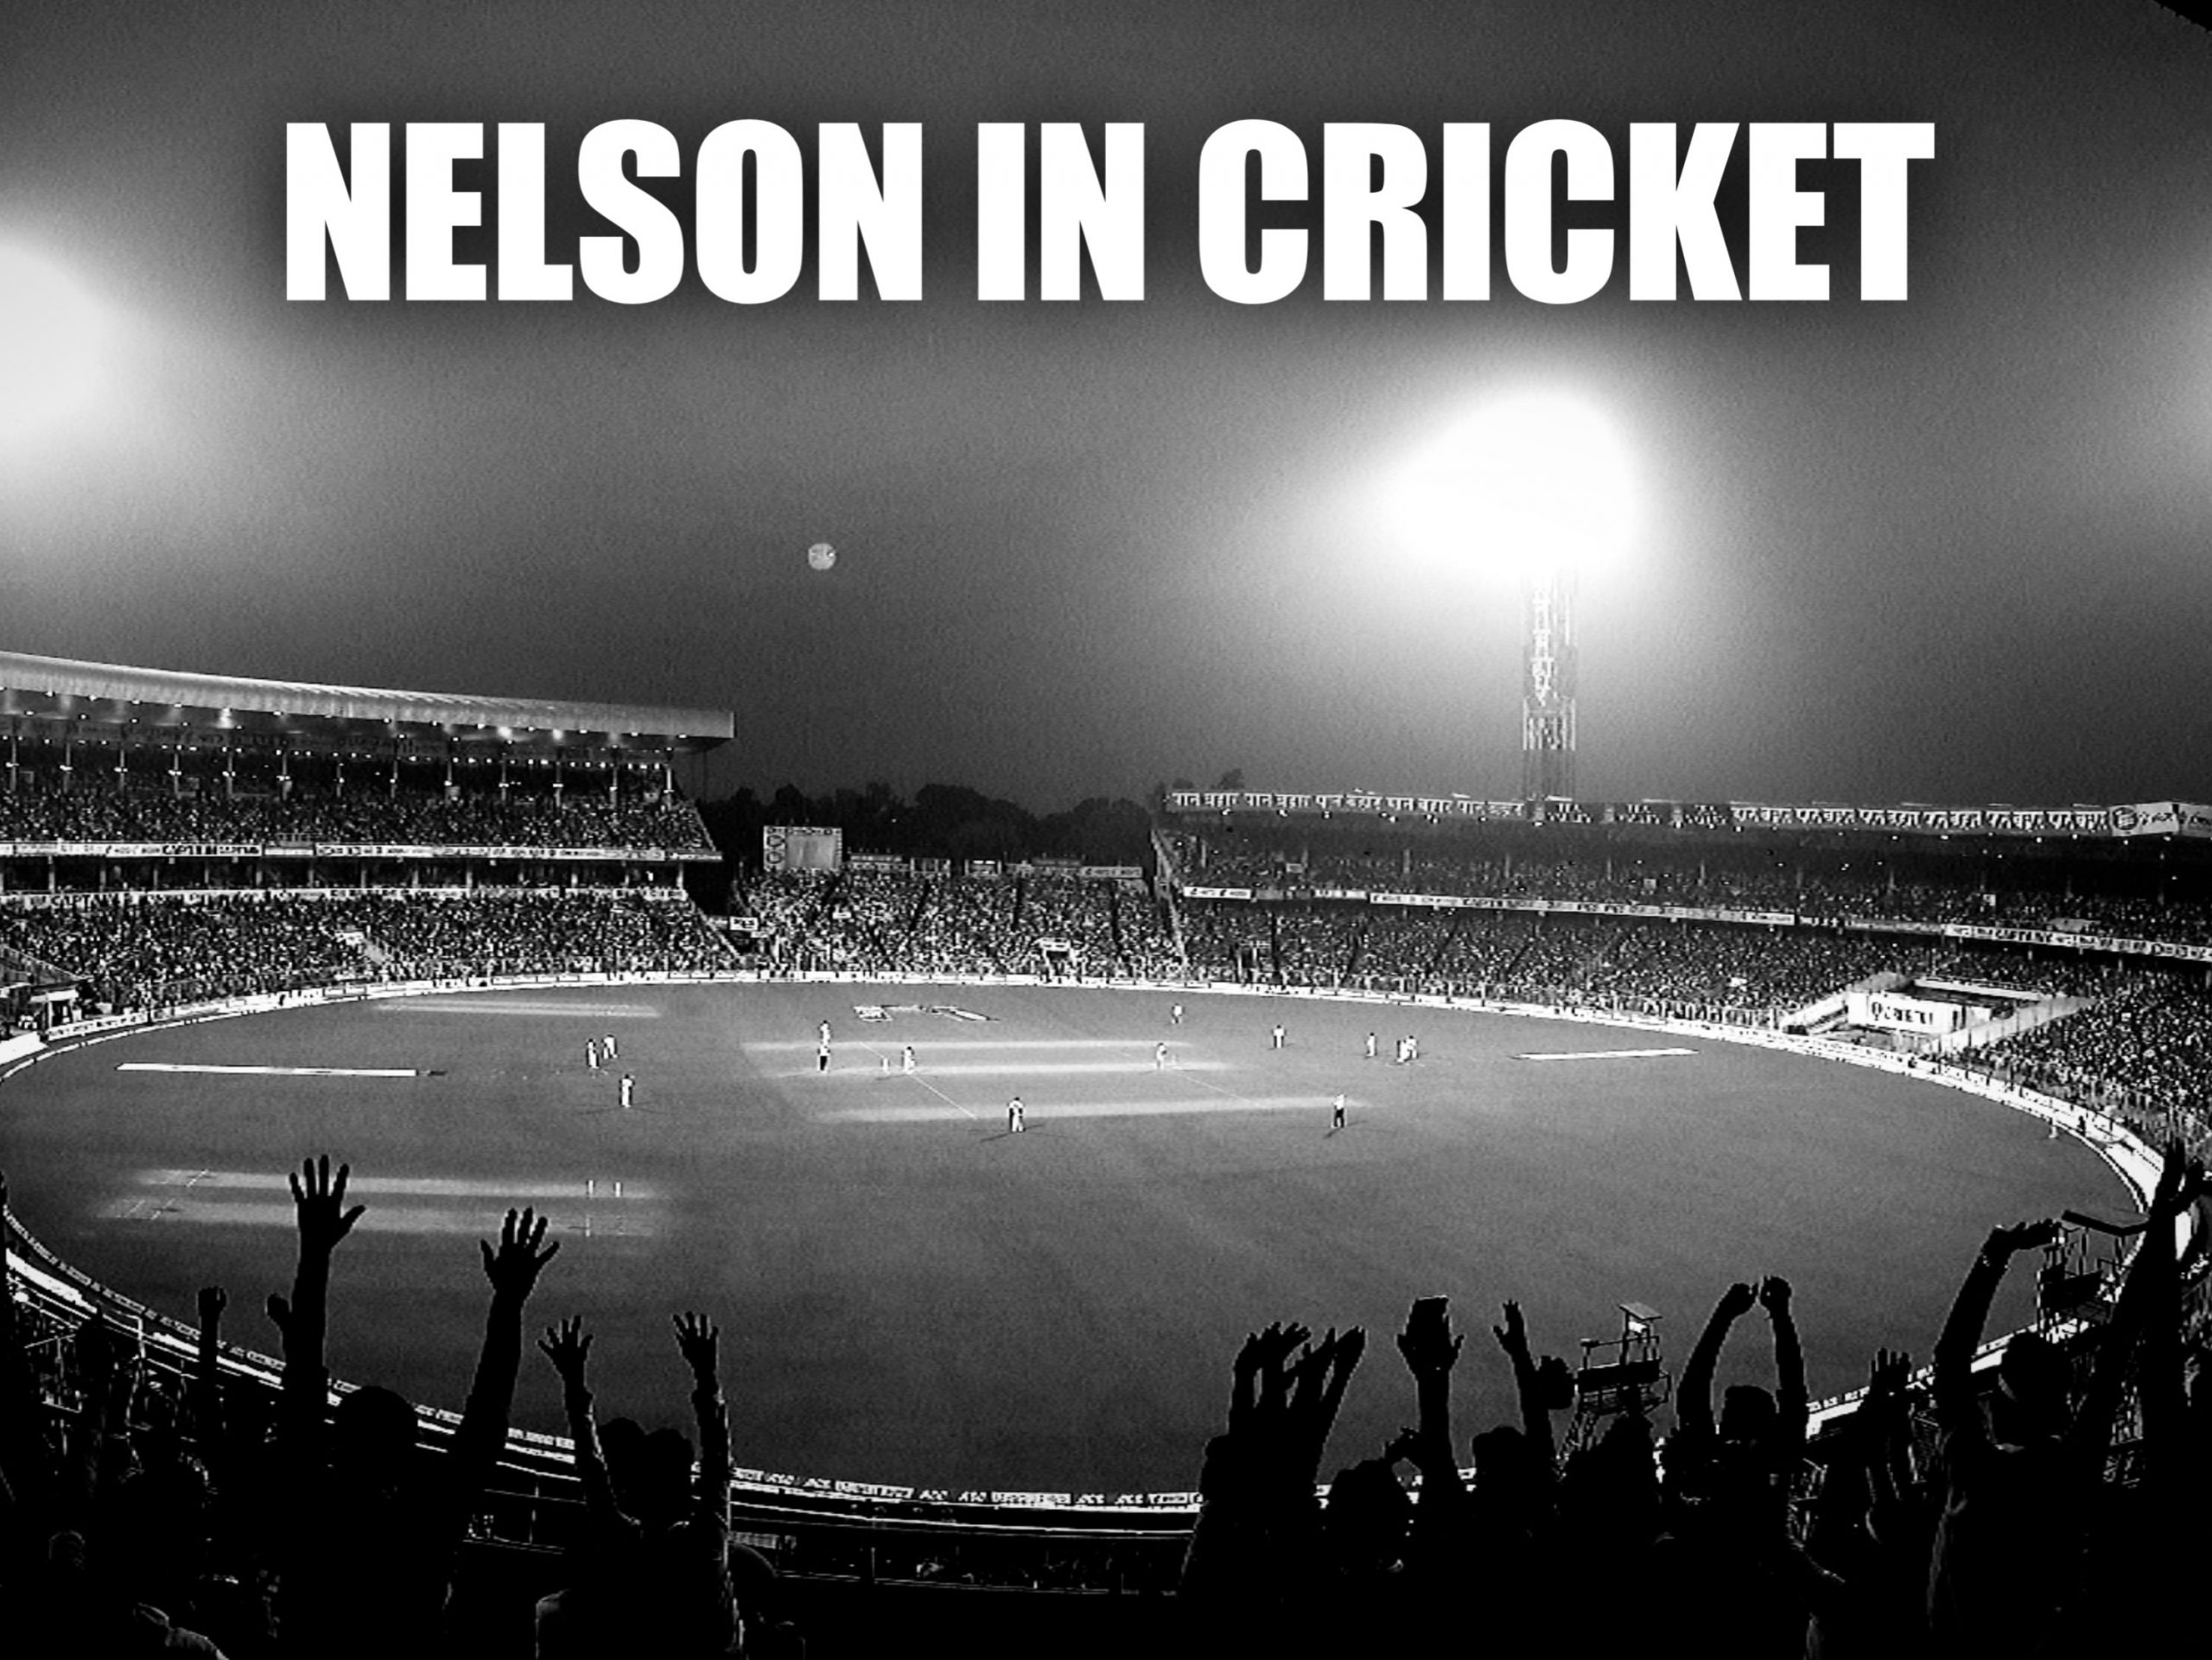 nelson in cricket, nelson number in cricket, what is nelson in cricket, nelson score in cricket, nelson in cricket 111, nelson runs in cricket, the nelson in cricket, nelson meaning in cricket,what is nelson score in cricket,meaning of nelson in cricket